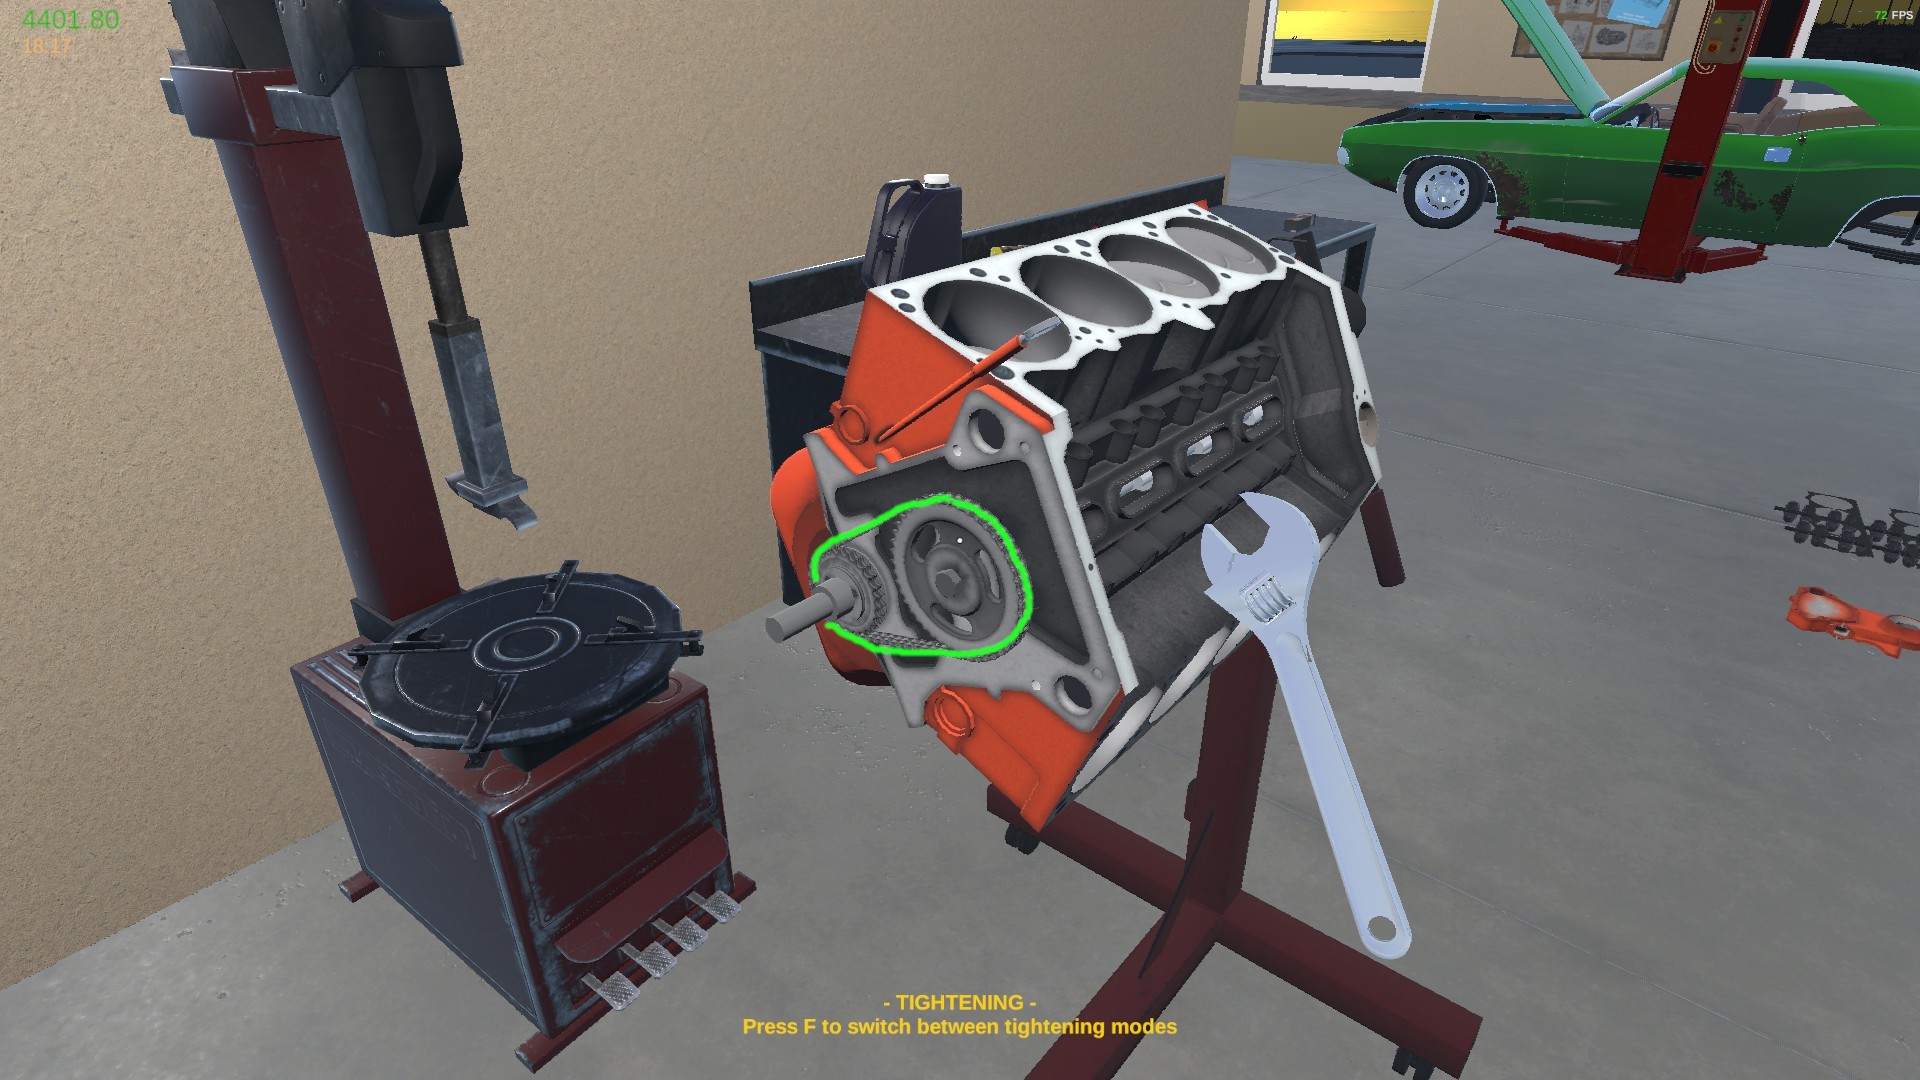 My Garage How to build a V8 engine guide - 2. Engine Block - 2A94CD4